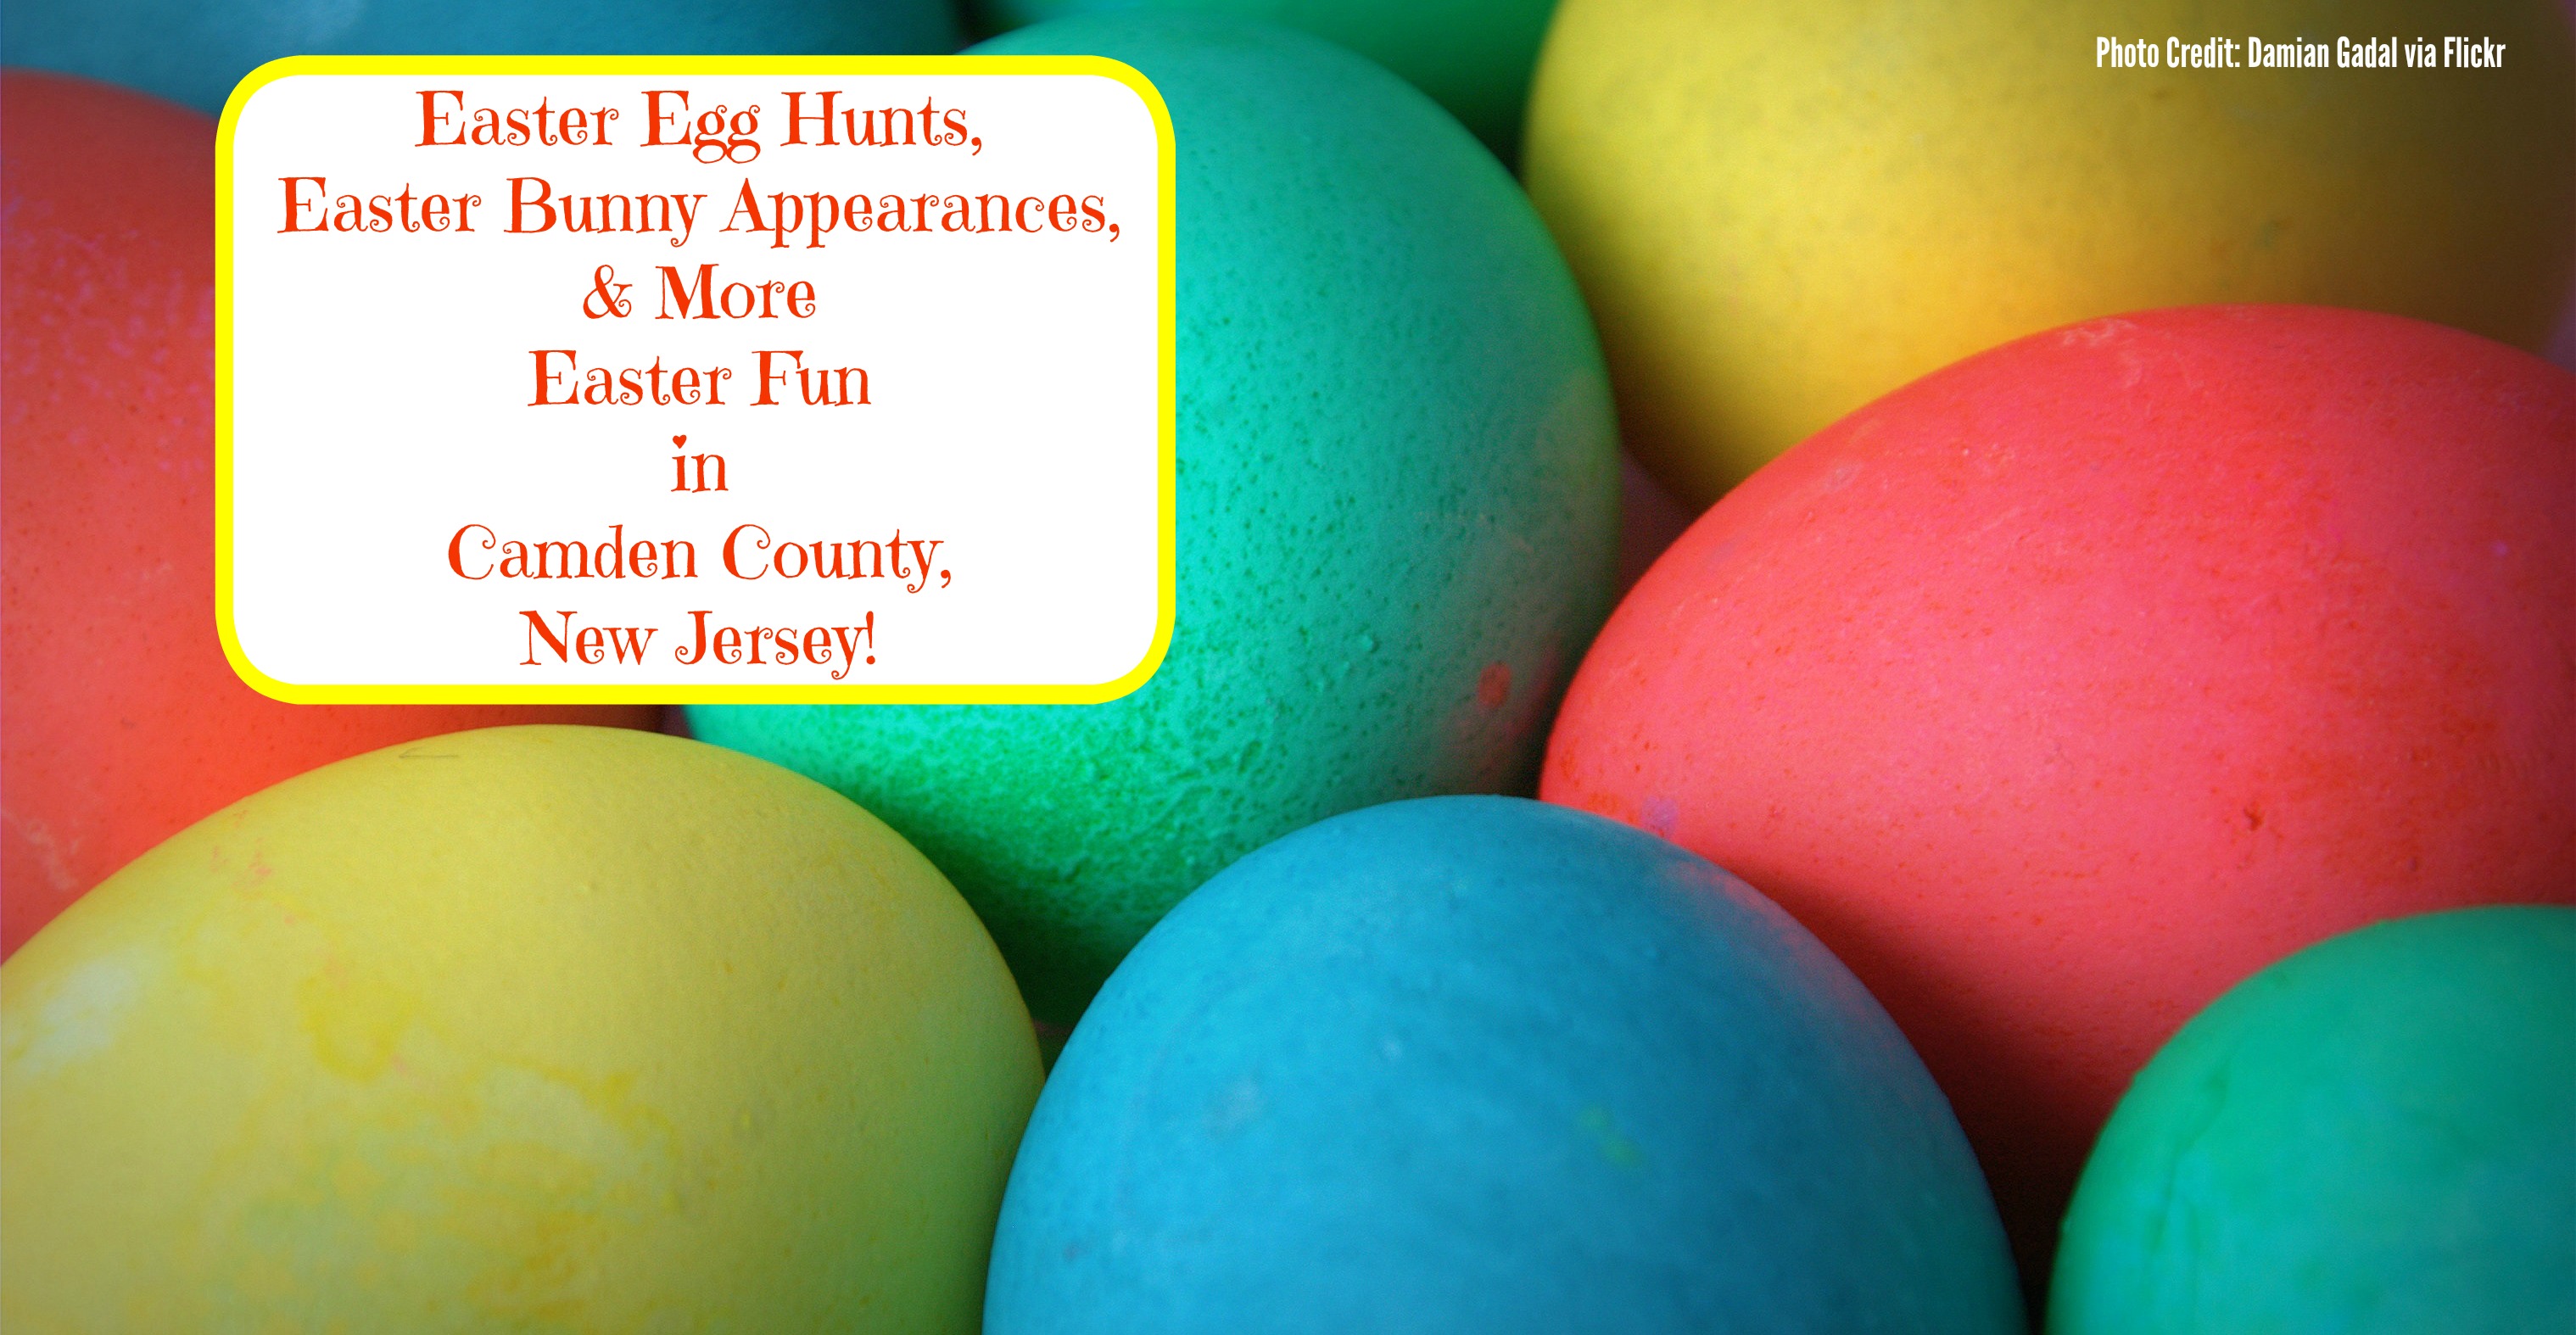 Fun Easter Events In Camden County NJ 2018 Edition Things to Do In New Jersey